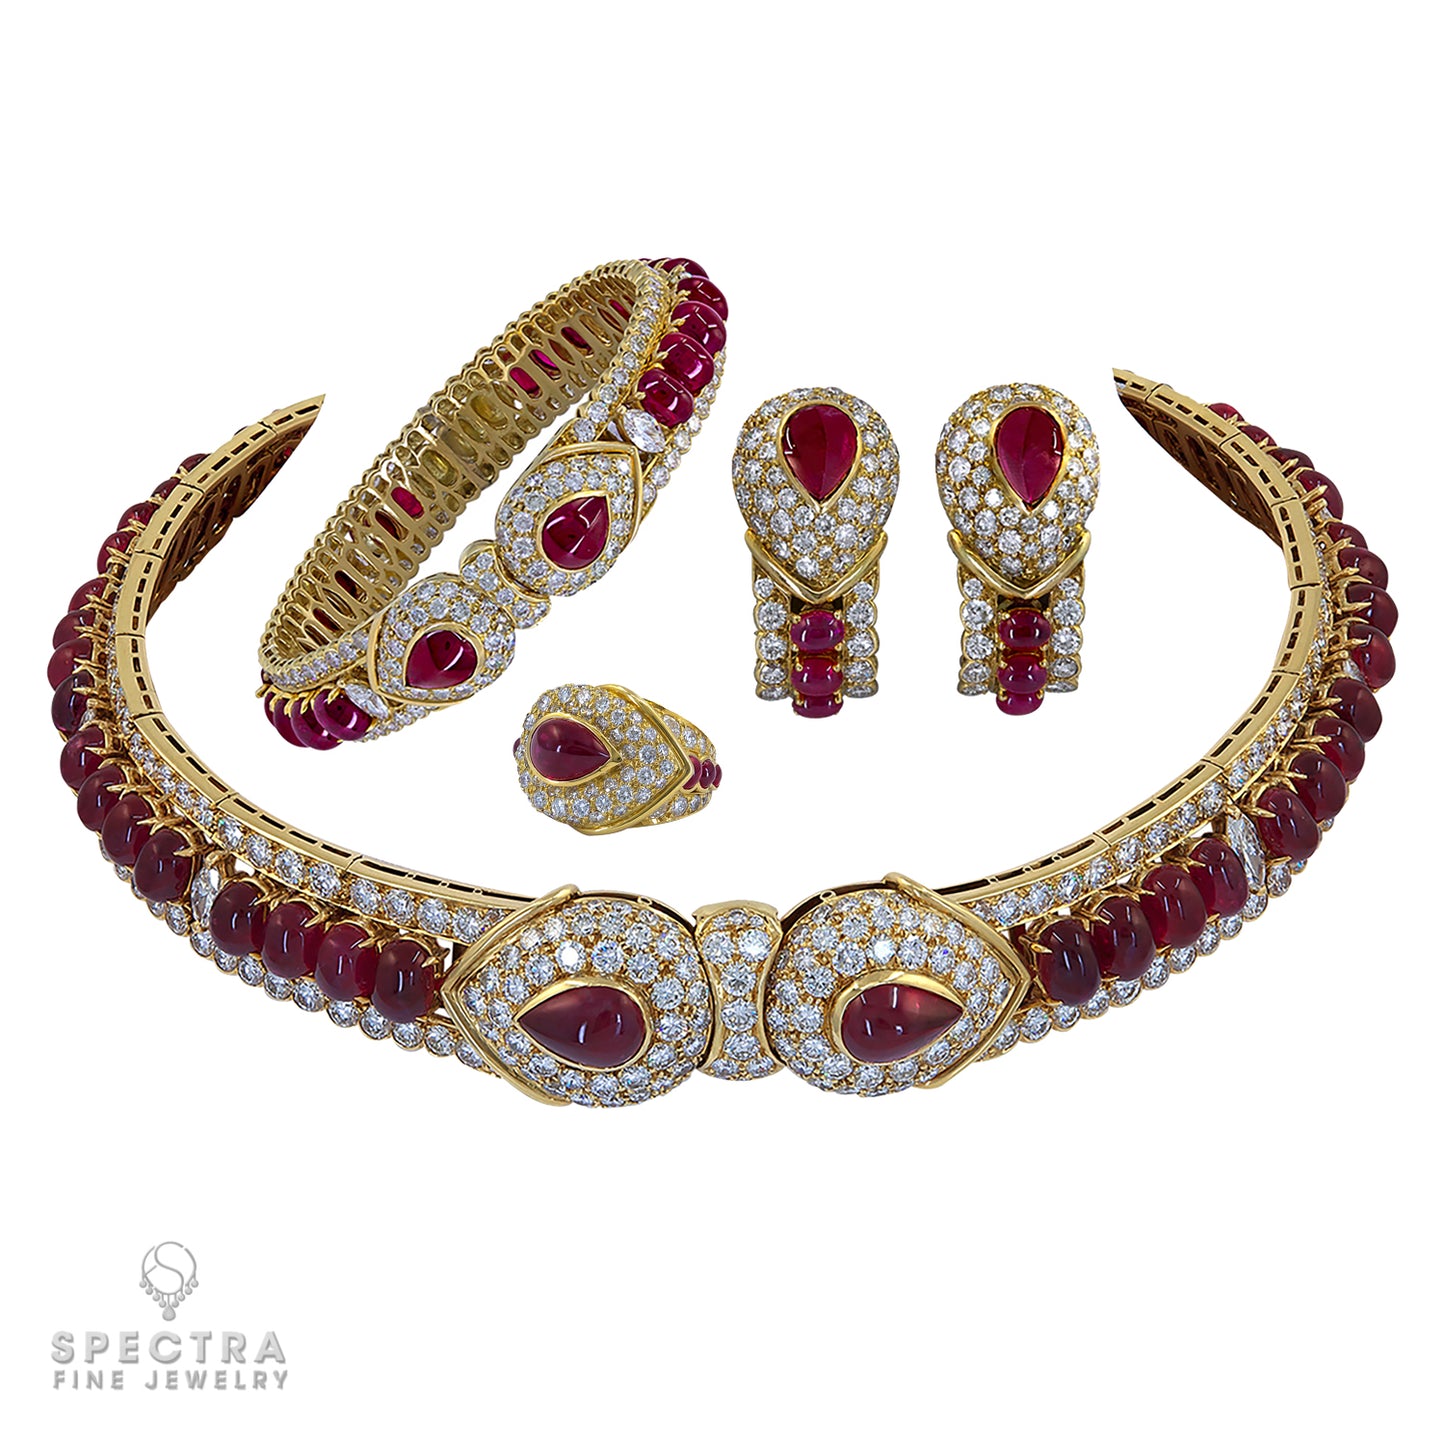 Graff 18K Yellow Gold Diamond and Rubies Suite Necklace